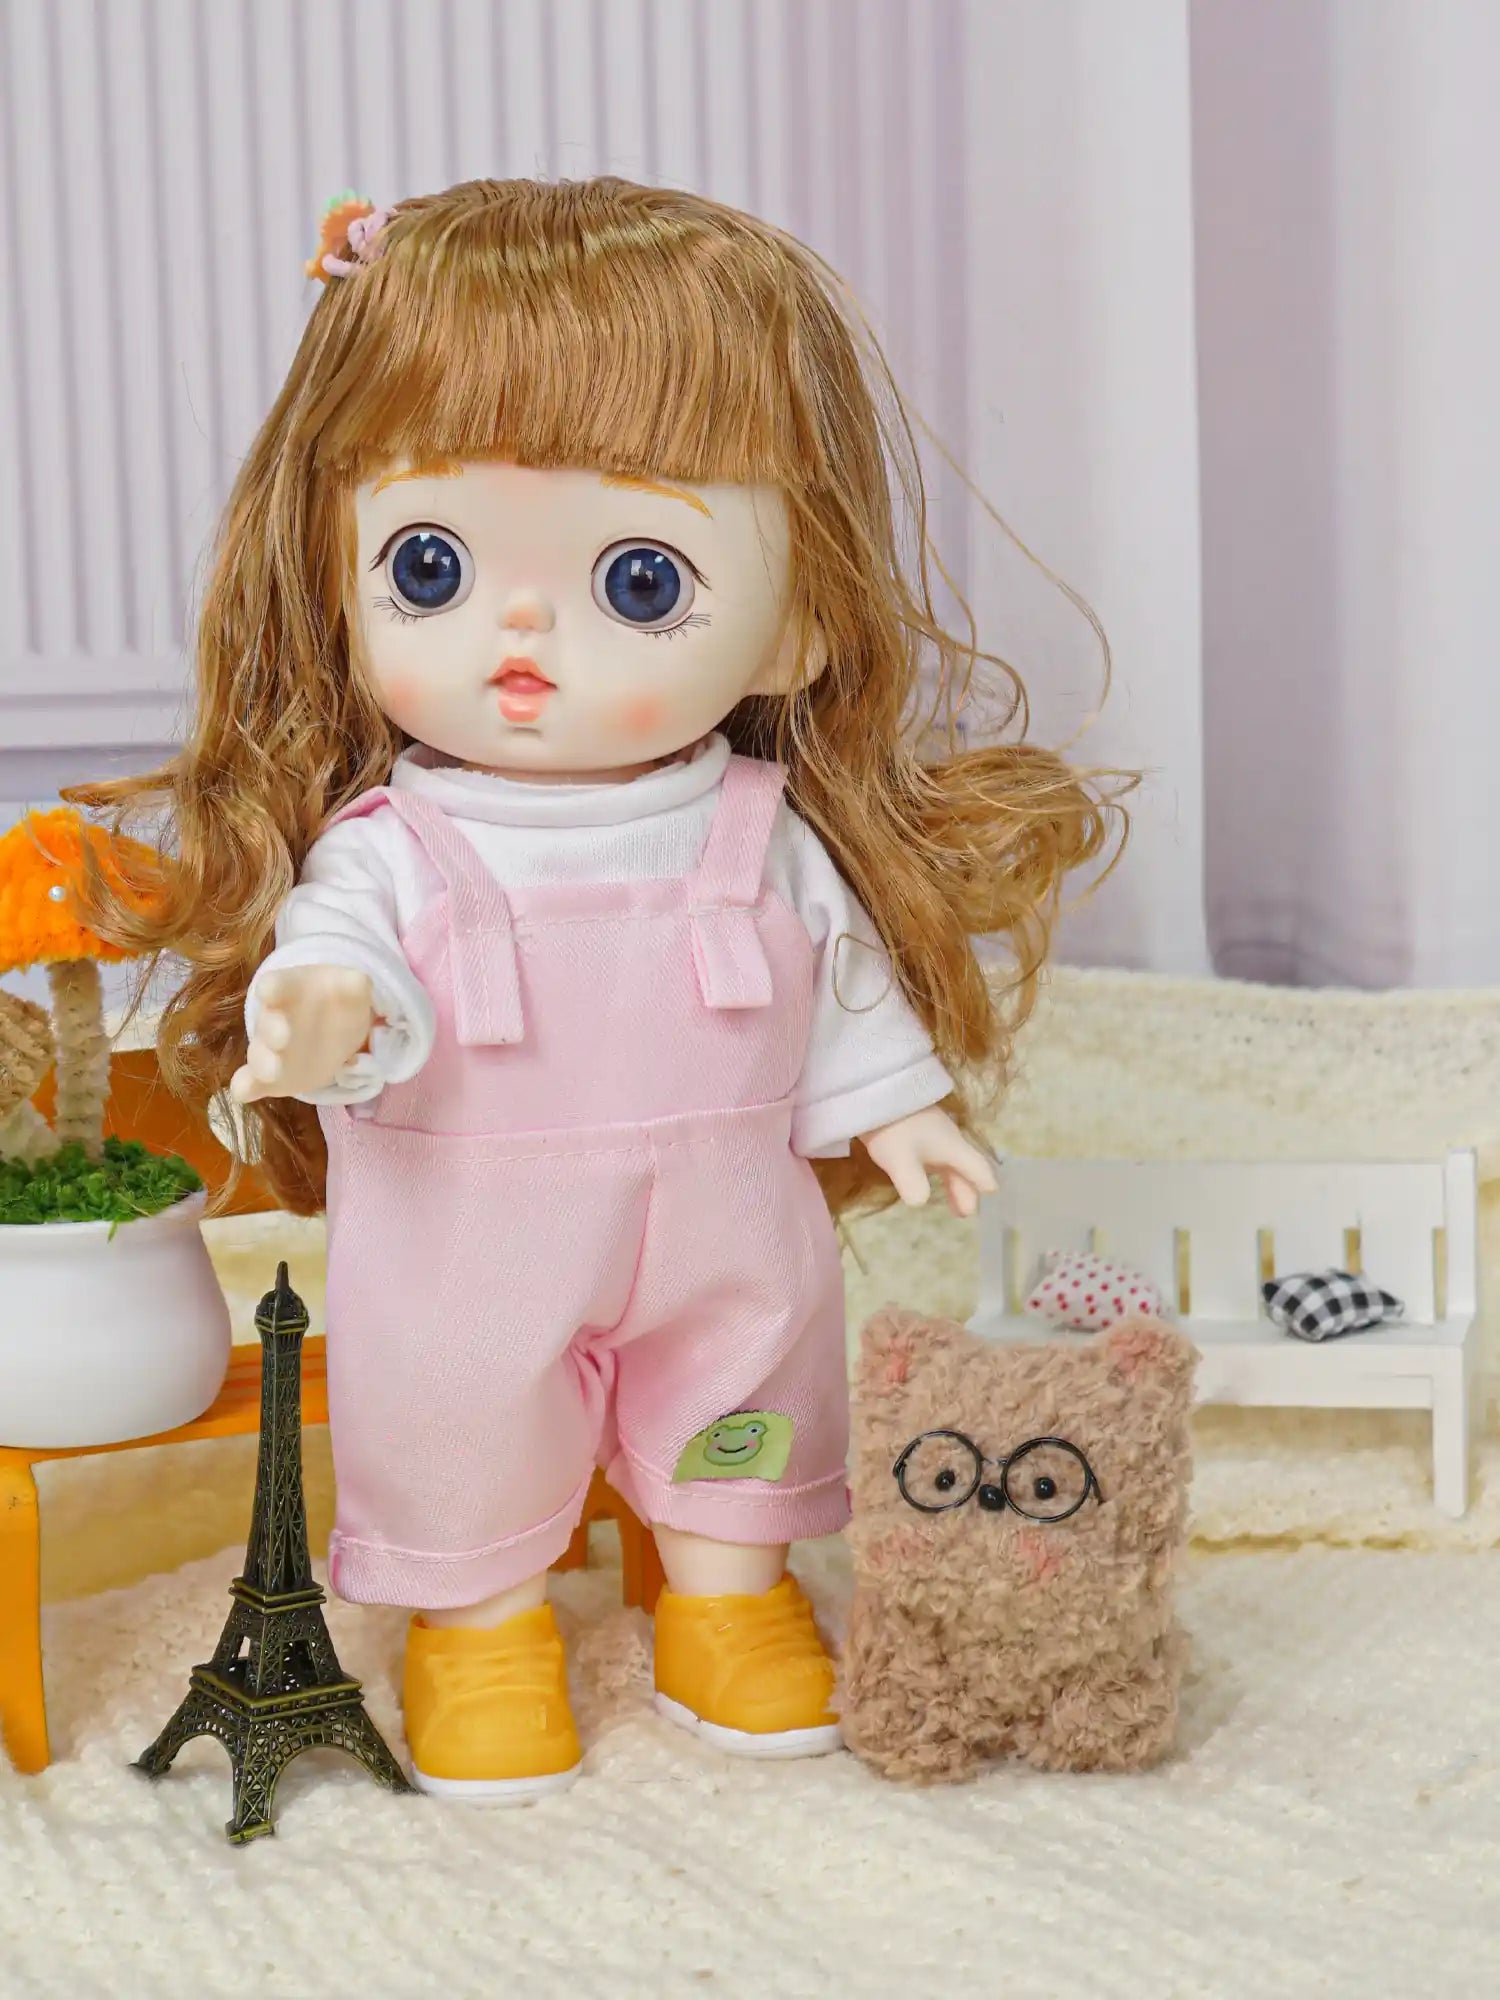 Toy doll with soft features and a cute hair accessory, in playtime attire with a plush companion and a miniature landmark.